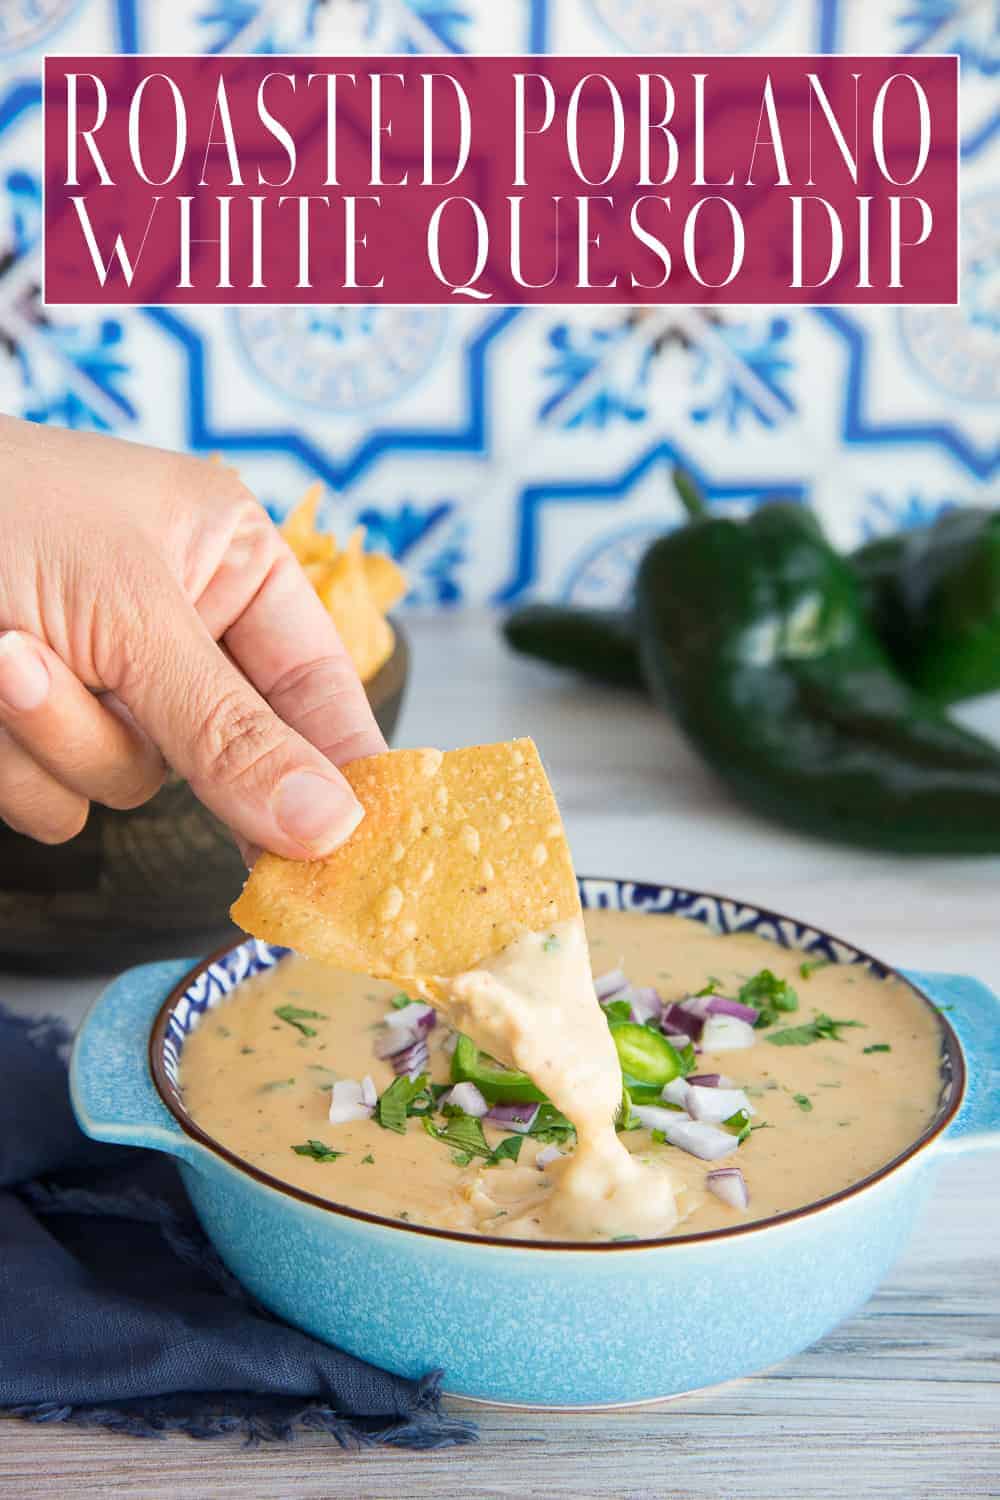 Roasted Poblano White Queso Dip is mildly spicy and packed full of flavor thanks to three different types of cheese. This creamy cheese dip is great for your next party or game day watching session. You can serve this dip with corn tortilla chips or use it as a sauce for your nachos. #poblanopeppers #whitequeso #whitequseodip #cheesedip #diprecipe #footballrecipes #gamedayrecipes #watchpartyrecipes #cheese #dip via @ediblesense